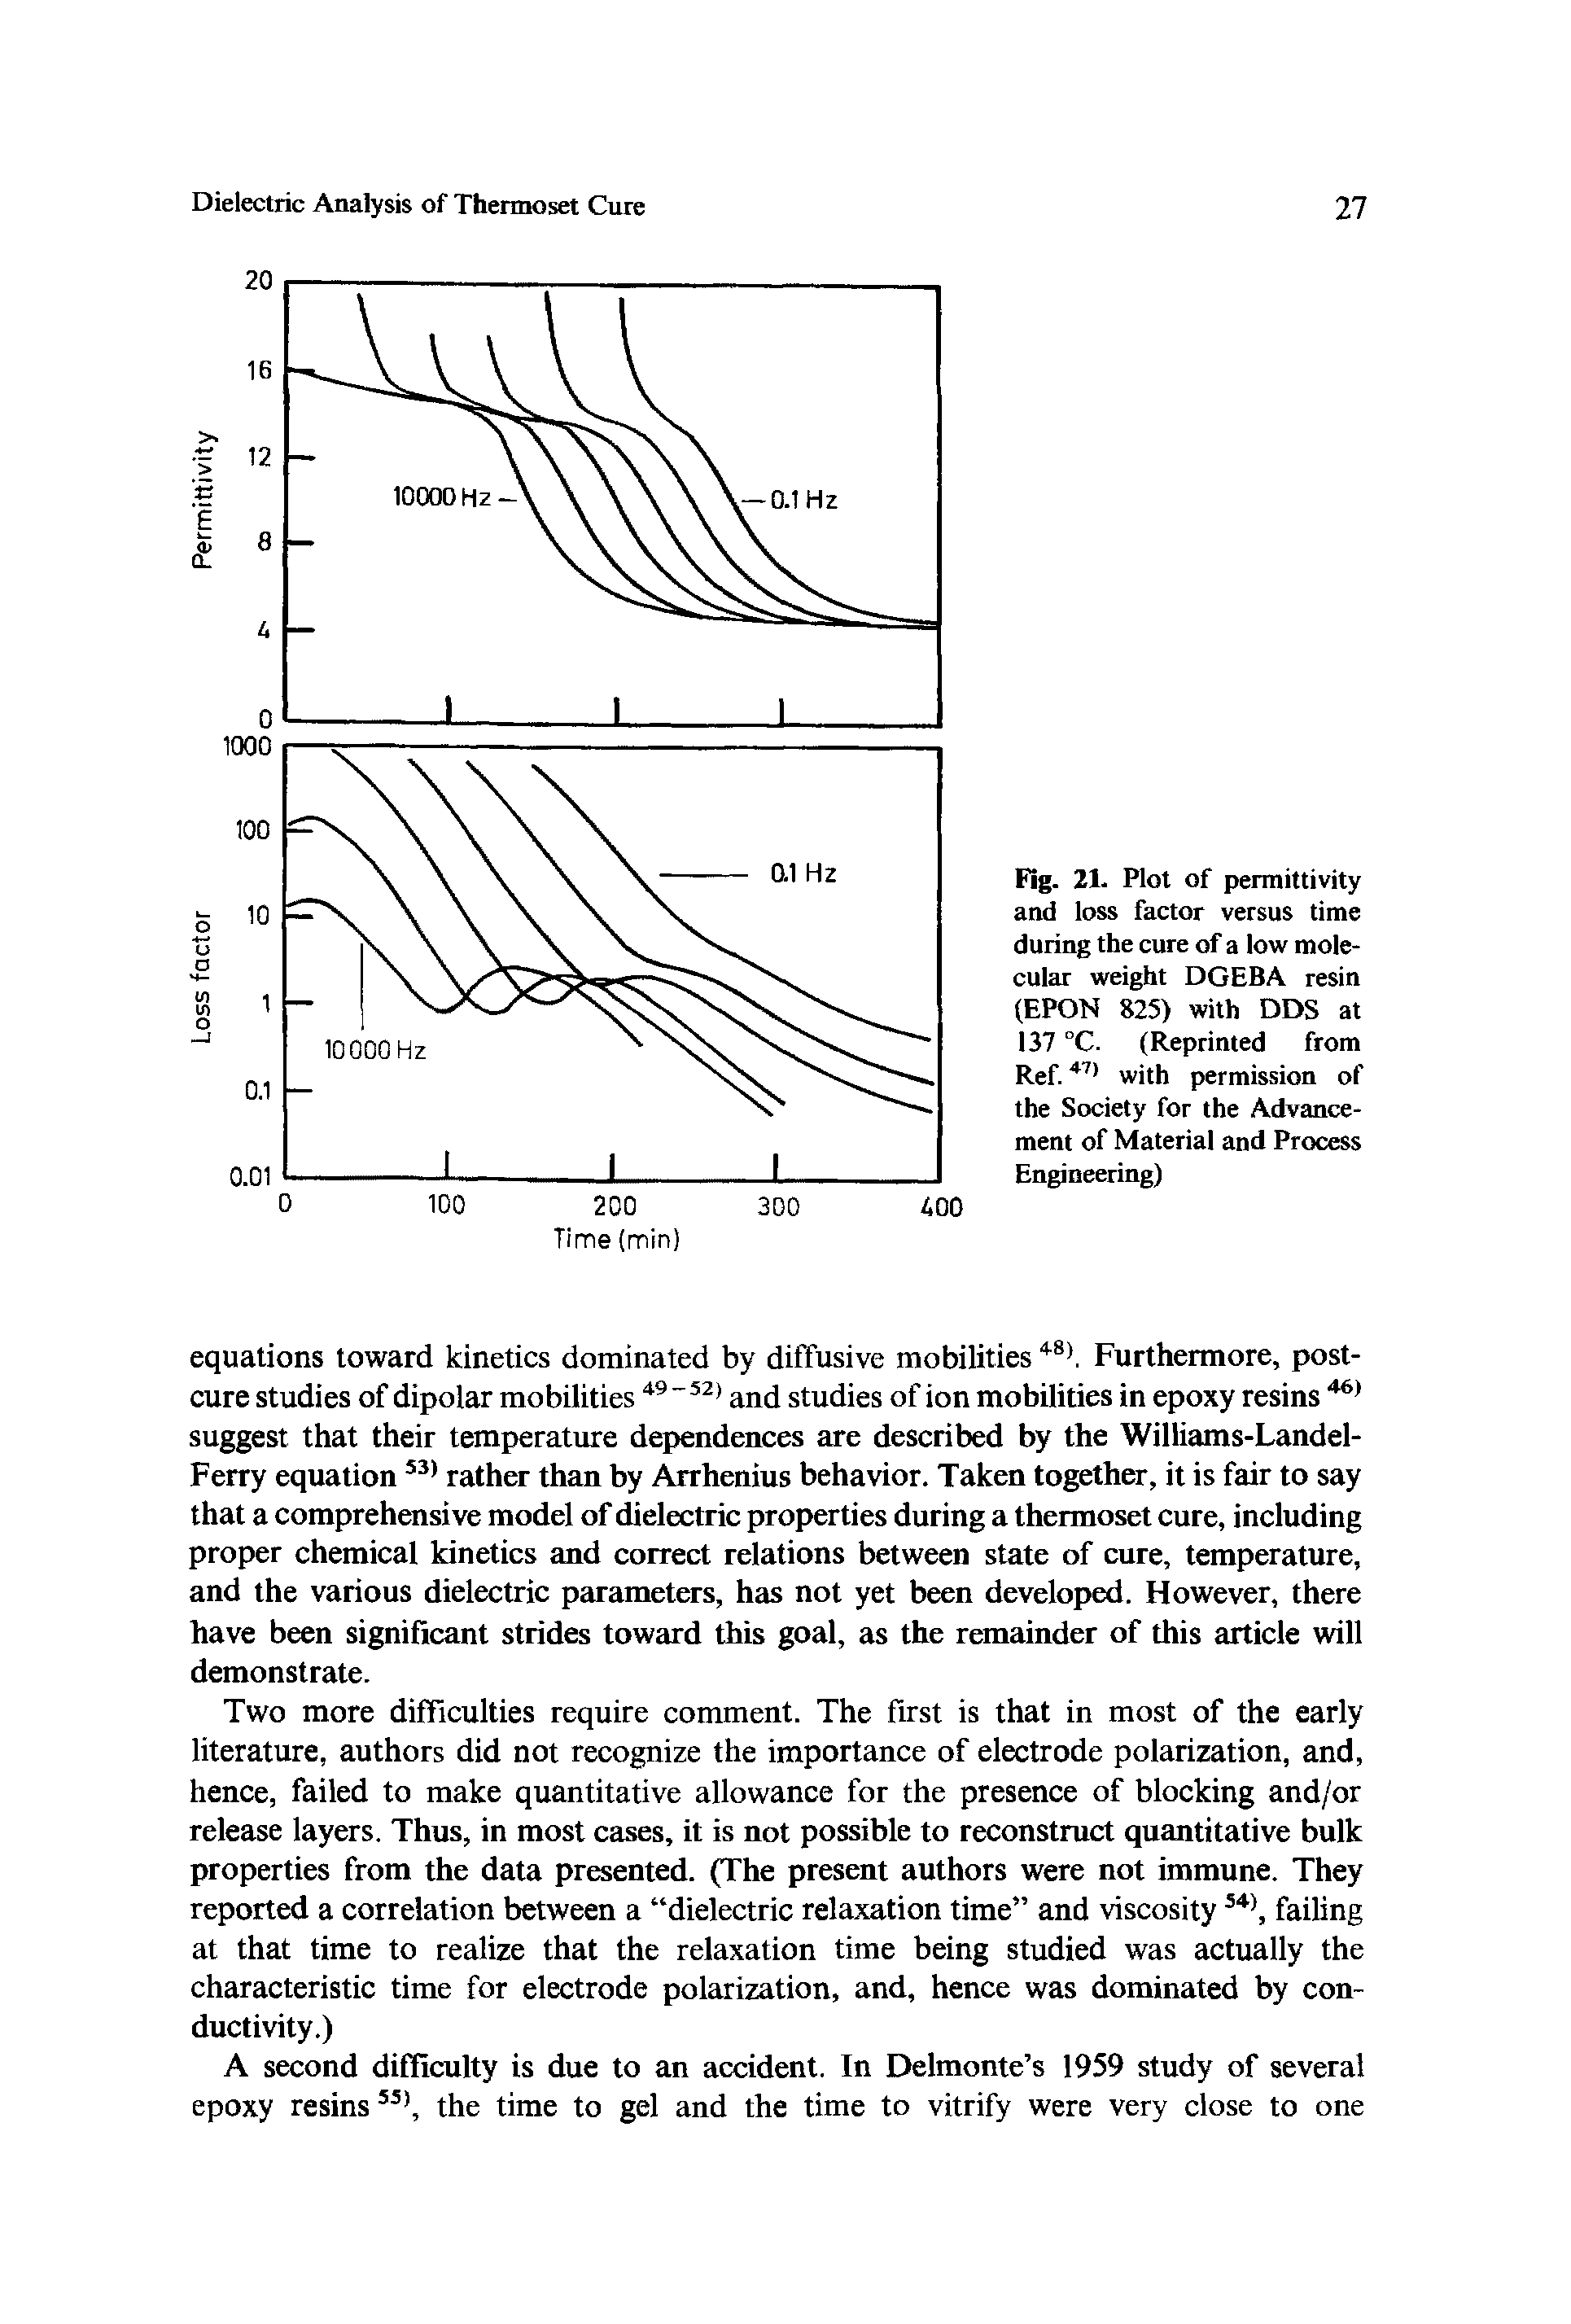 Fig. 21. Plot of permittivity and loss factor versus time during the cure of a low molecular weight DGEBA resin (EPON 825) with DDS at 137 °C. (Reprinted from Ref.47) with permission of the Society for the Advancement of Material and Process Engineering)...